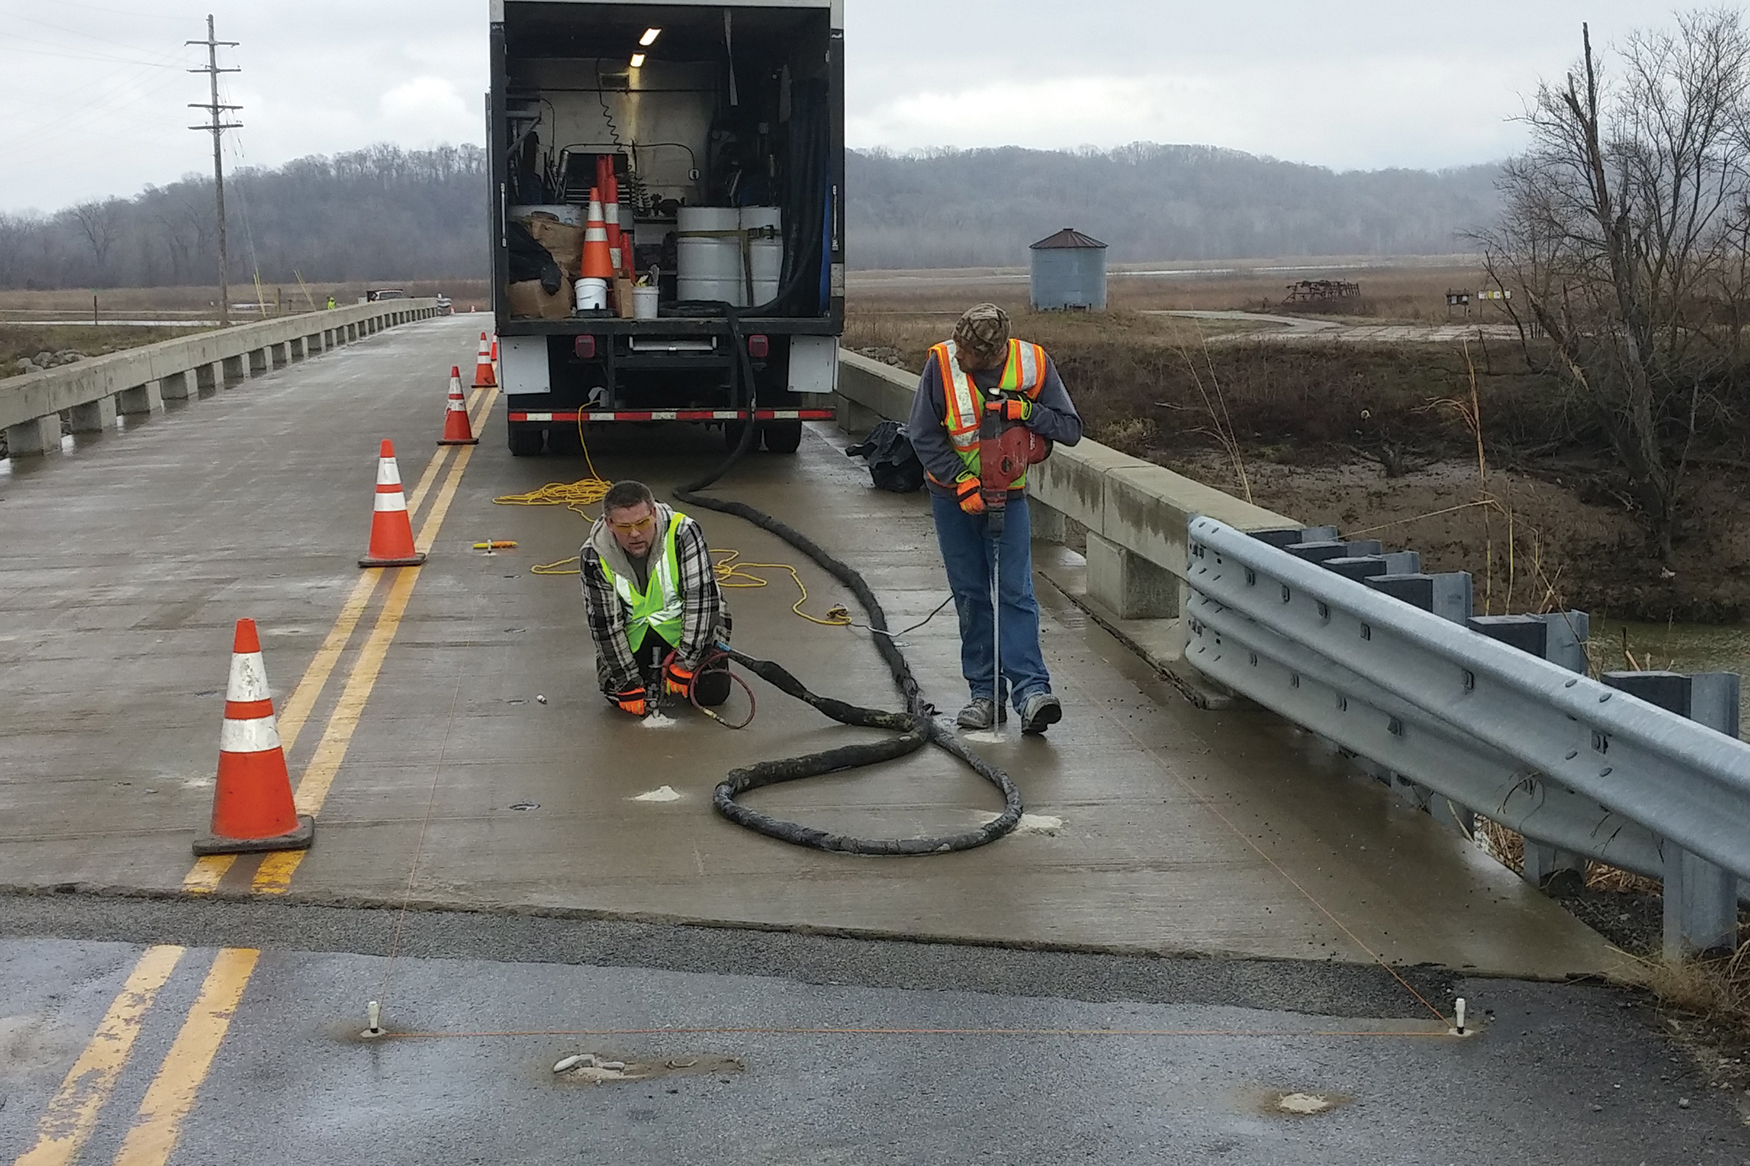 PolyPier concrete lifting foam being injected under the road on a bridge.